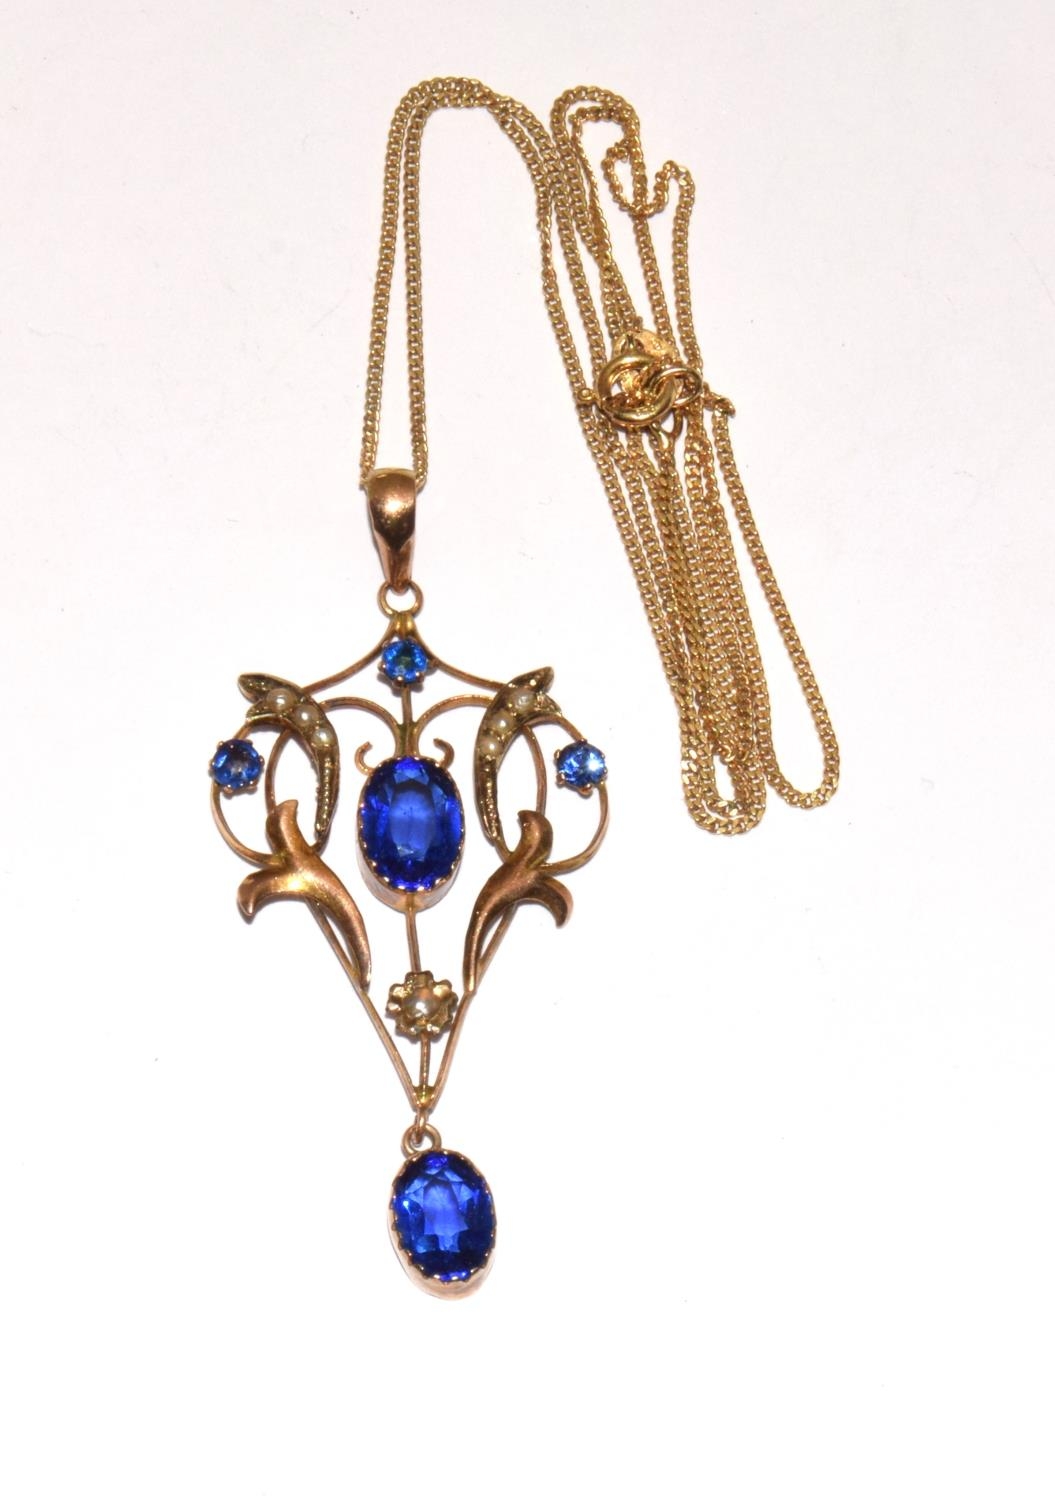 9ct gold Belle Epoque pendant set with blue stones and pearls on a gilded chain